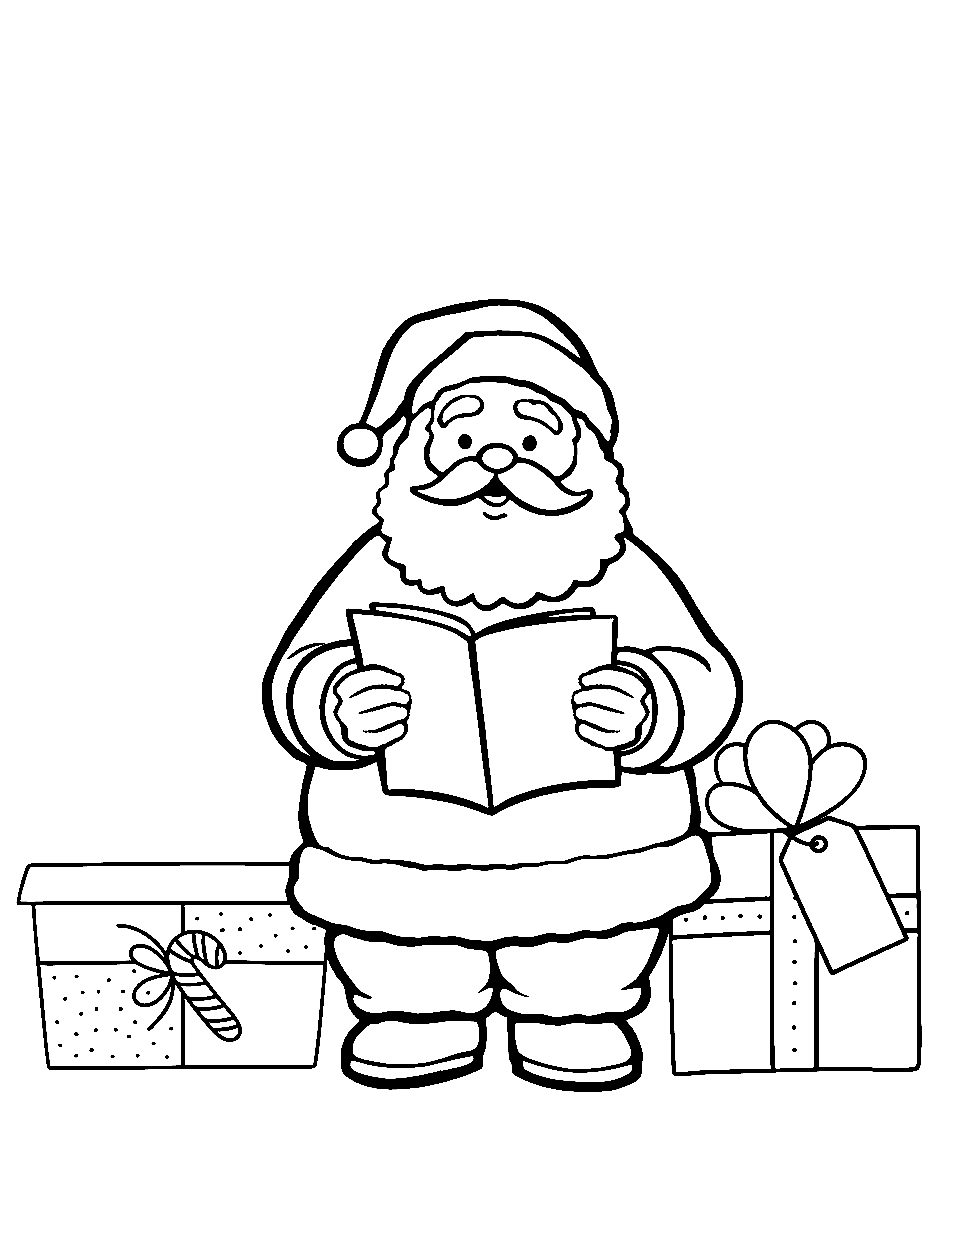 Santa Reading Letters Coloring Page - Santa reading Christmas wish letters from children all around the world.